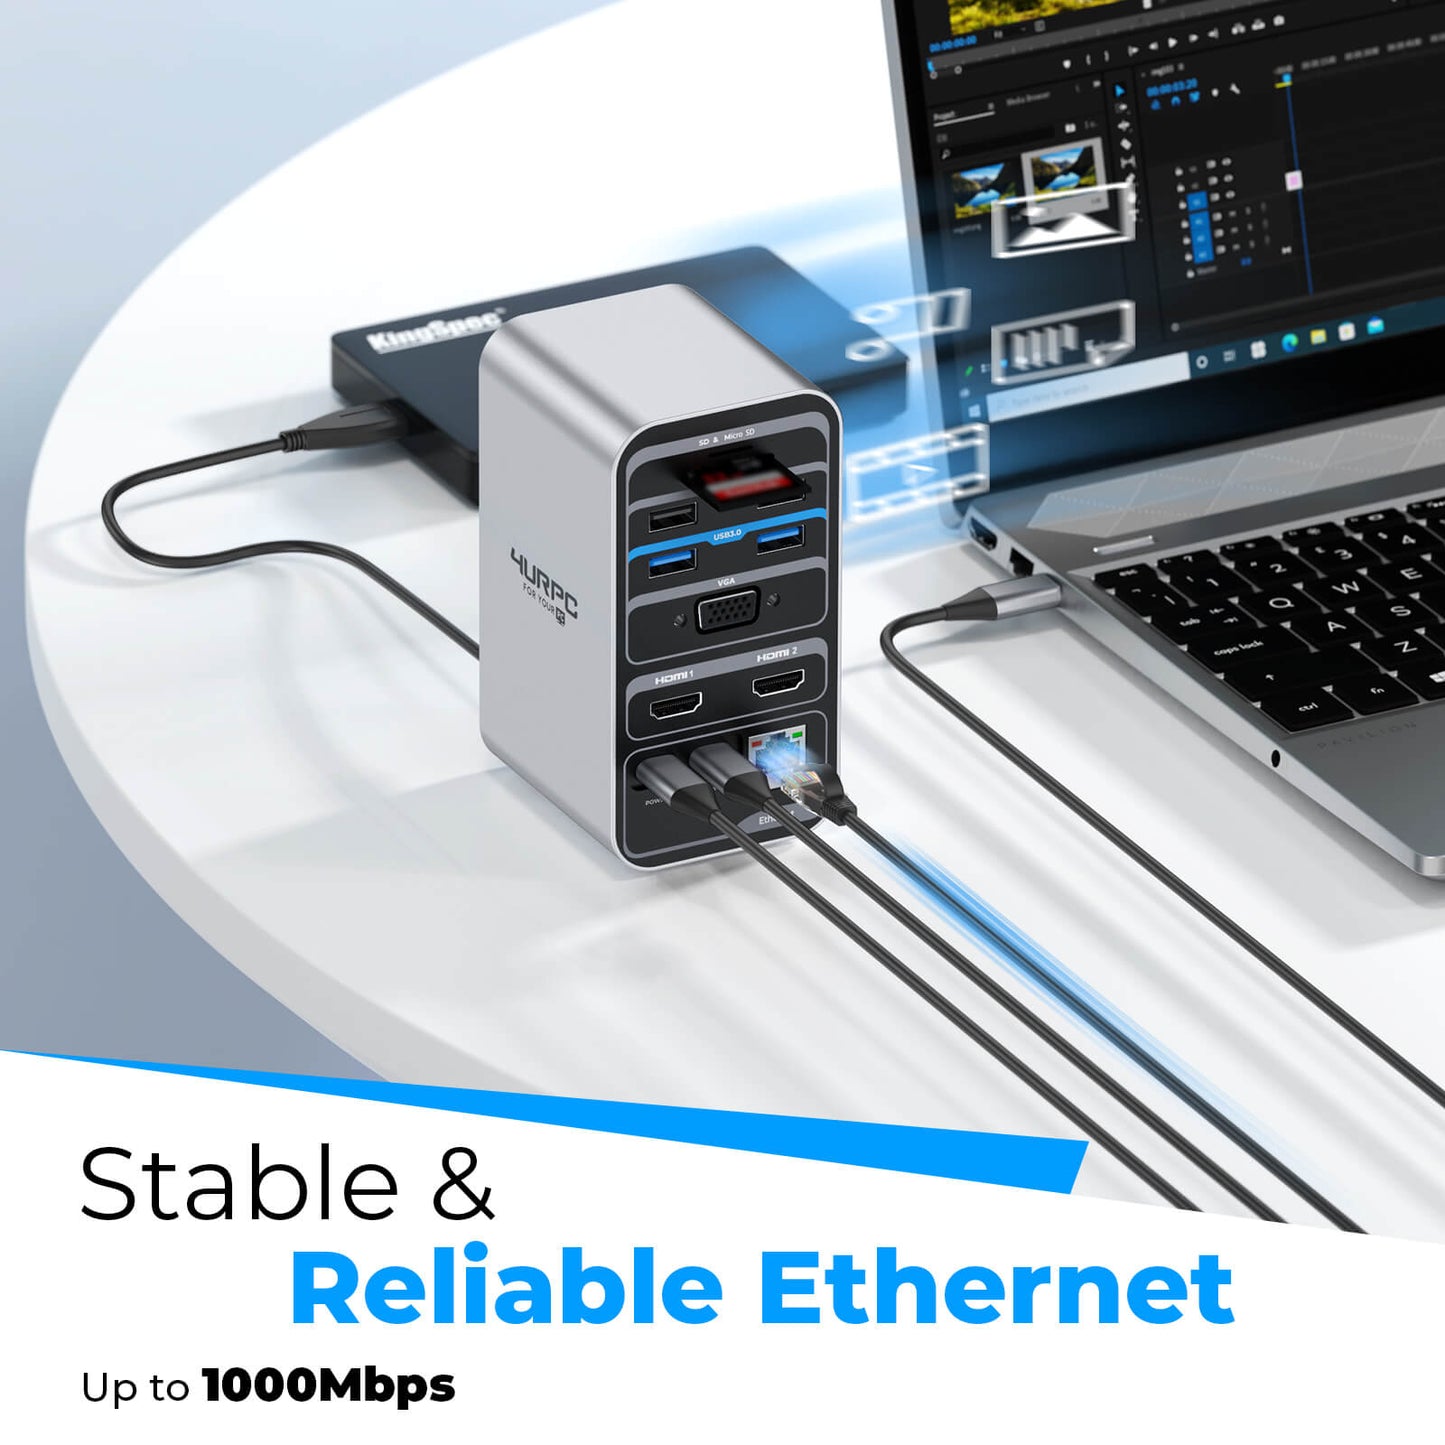 DS-C05 High-Speed Stable Wired Ethernet Docking Station